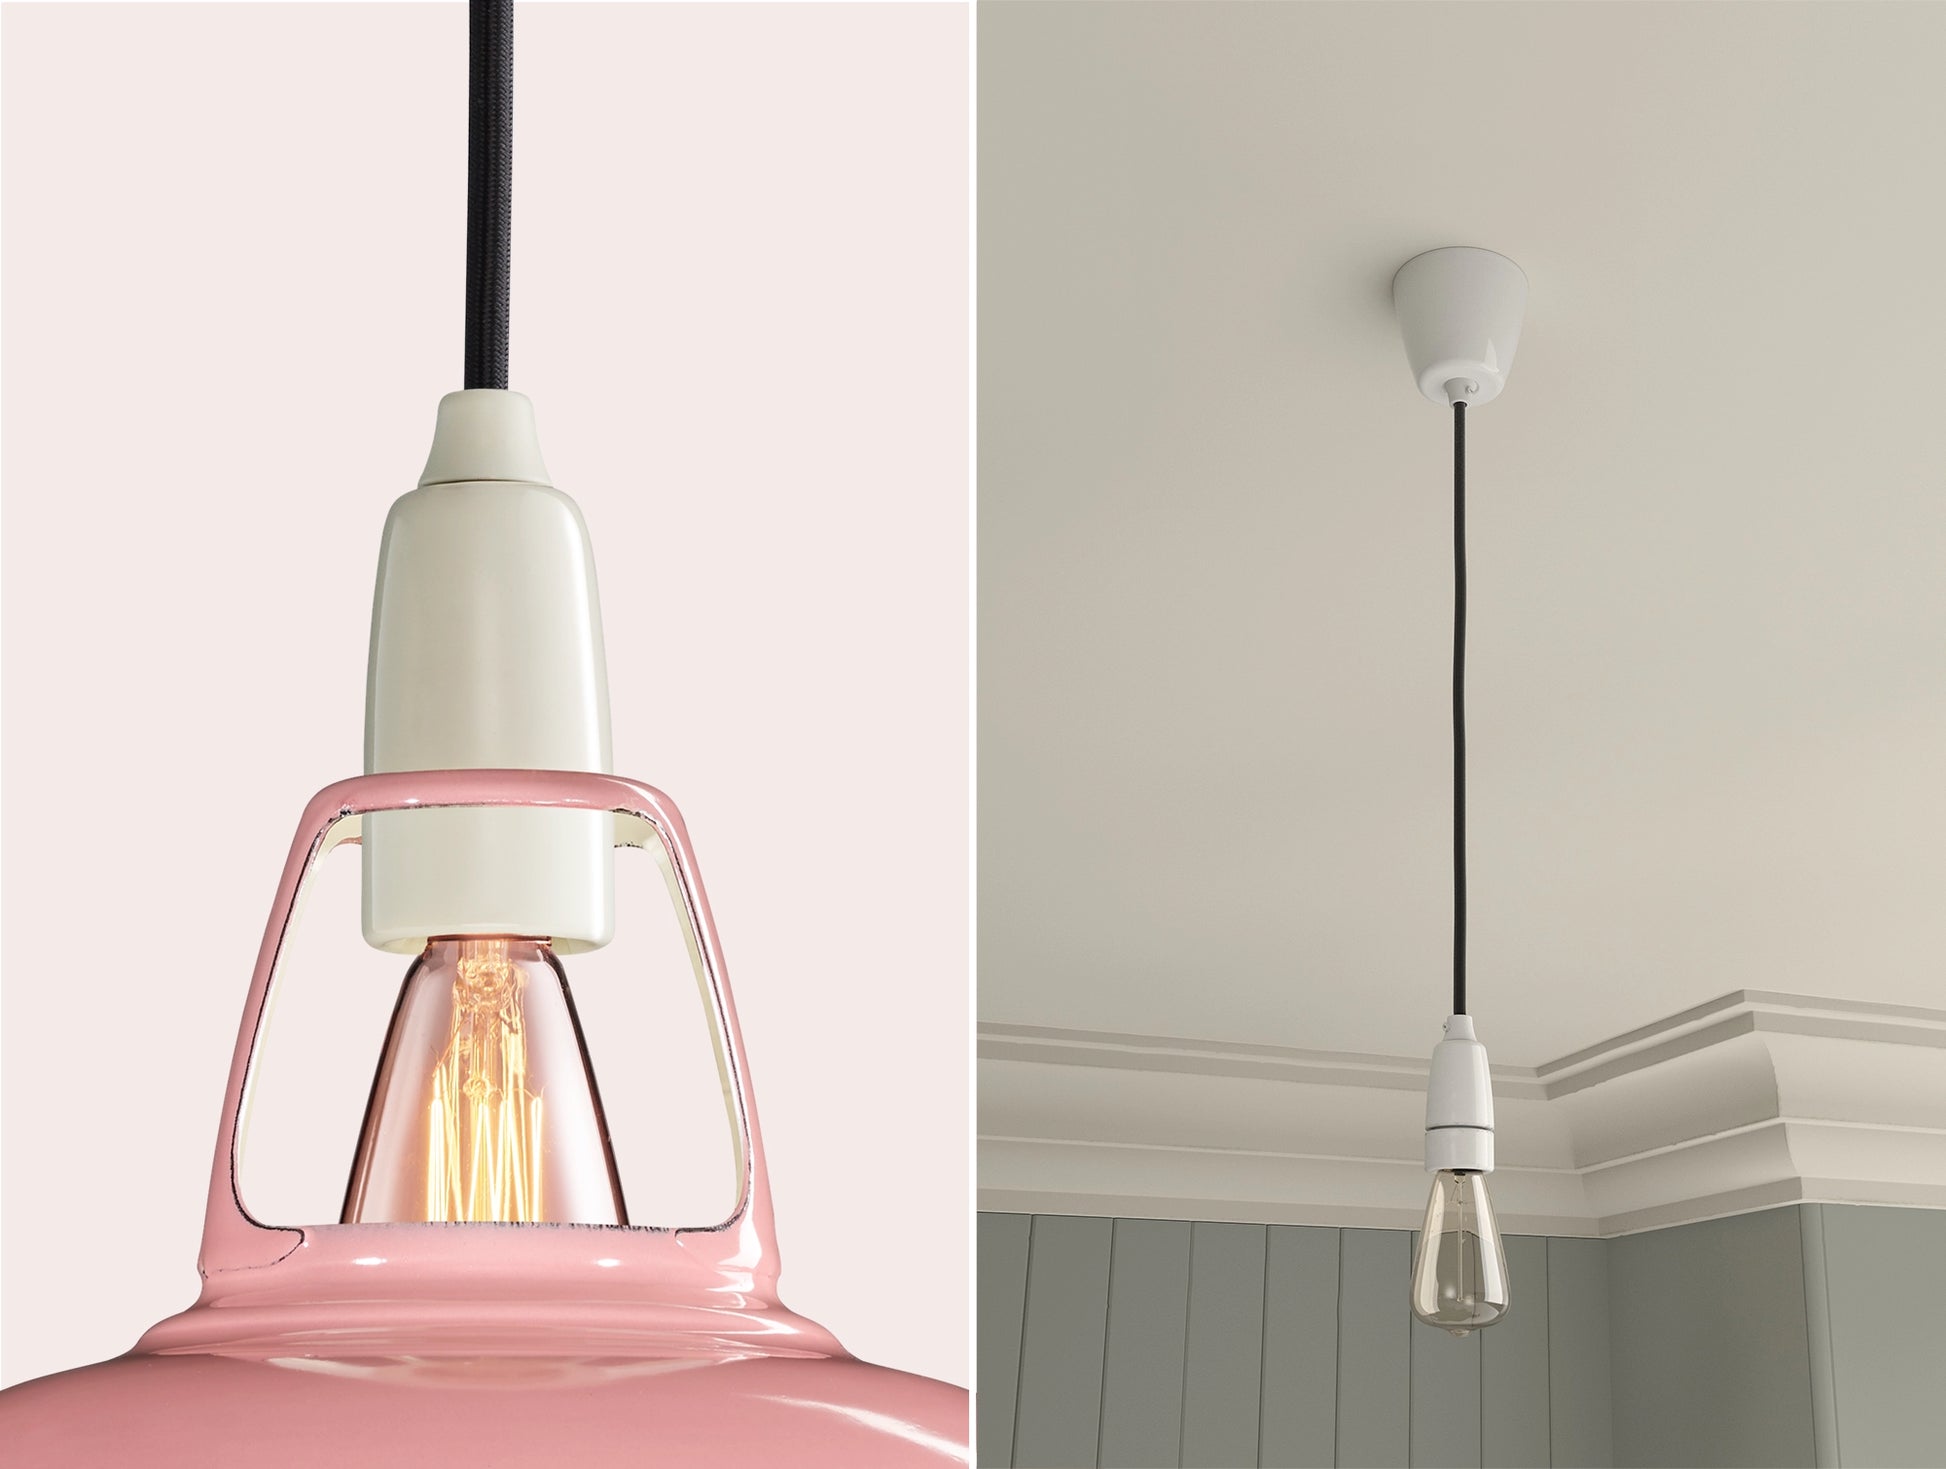 Close up of an E14 Porcelain suspension set on a Powder Pink lampshade on the left. On the right, an E14 Porcelain pendant set with a lightbulb is hanging from the ceiling